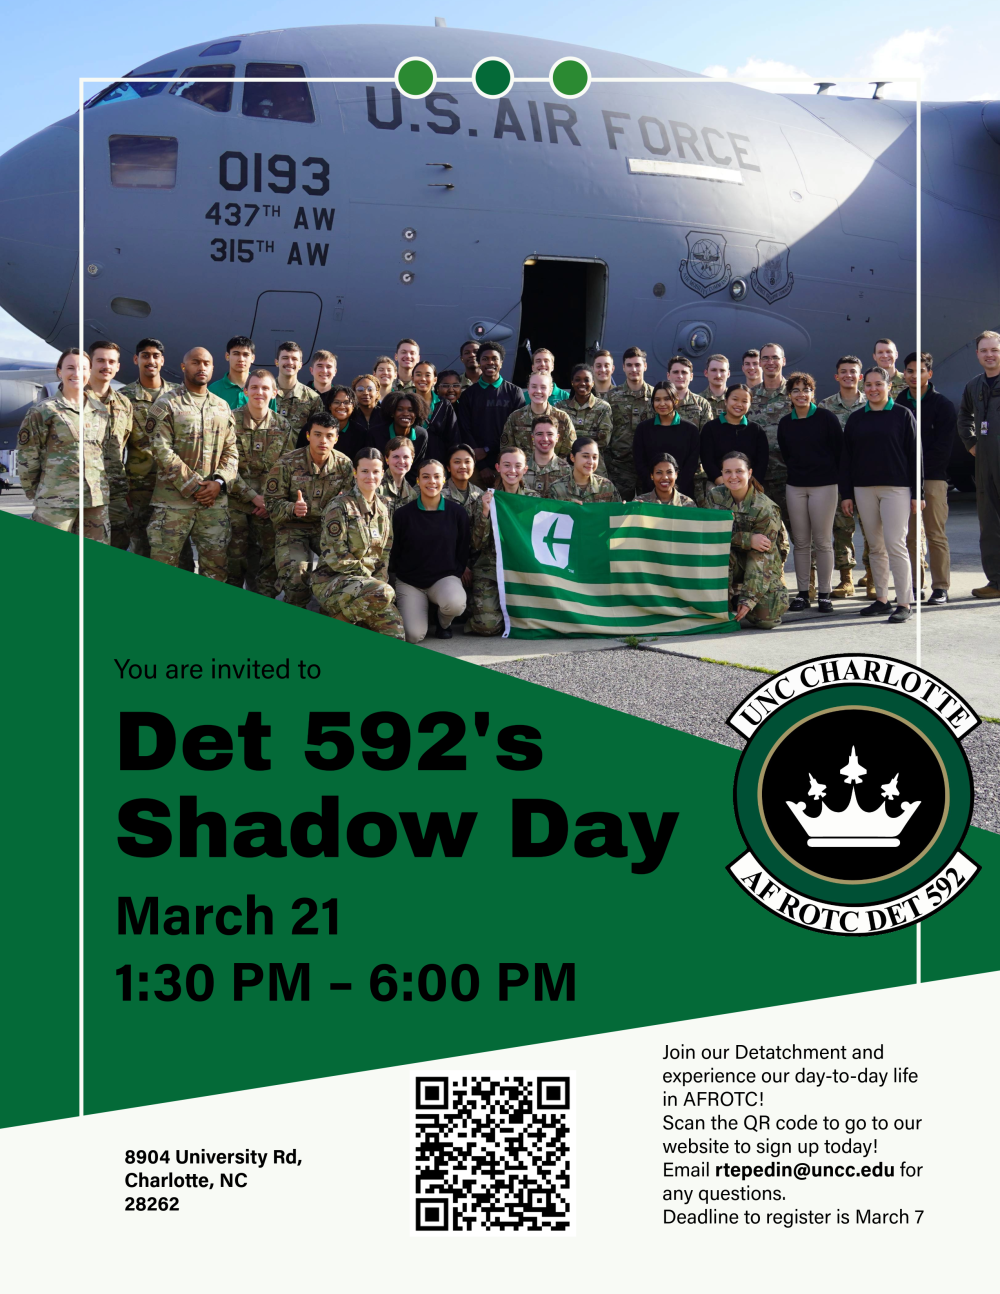 A Flyer that states that you are invited to Det 592's Shadow Day.